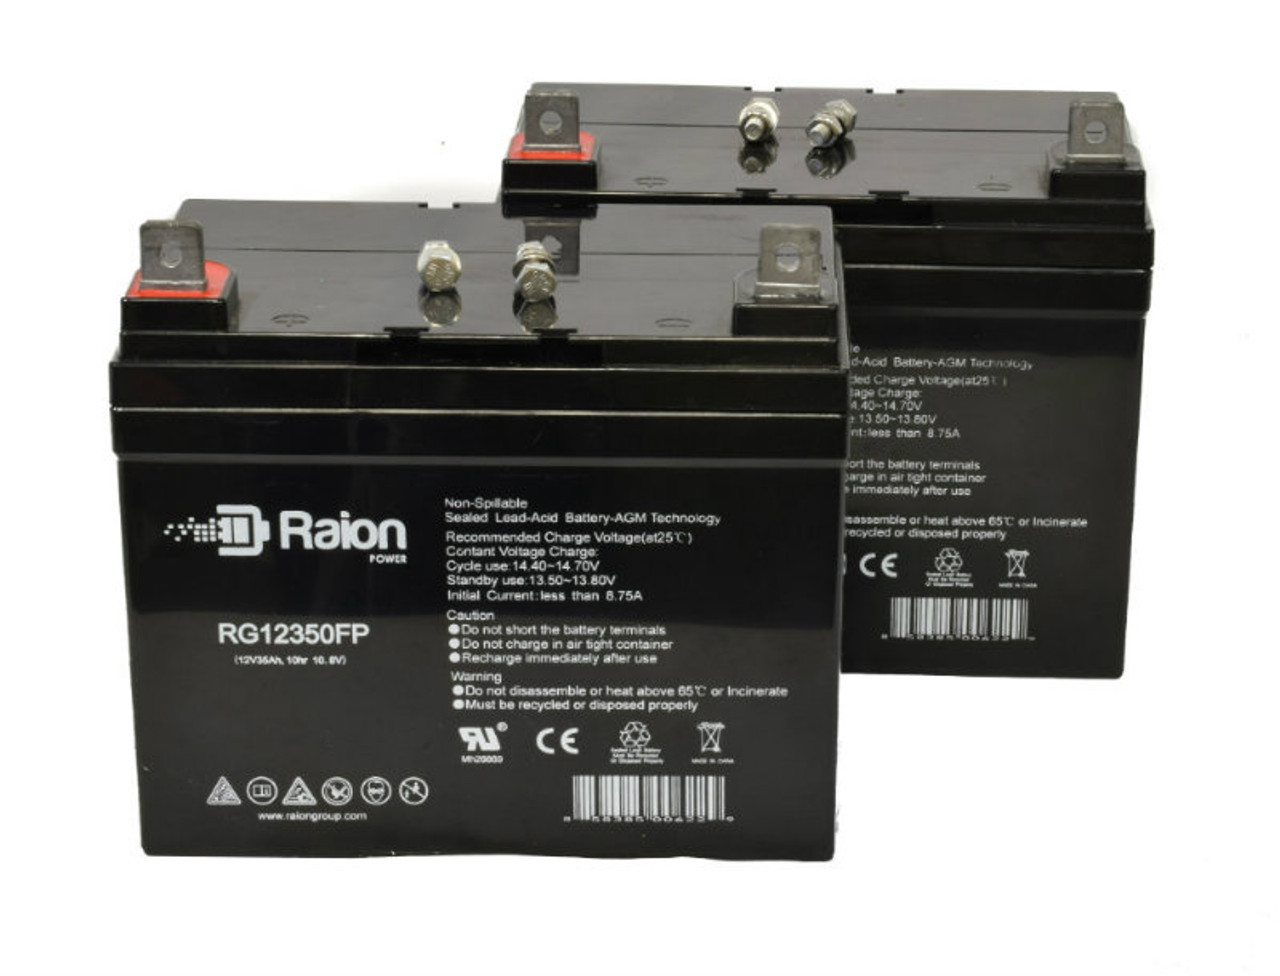 Raion Power Replacement 12V 35Ah Lawn Mower Battery for Toro 21-42 - 2 Pack